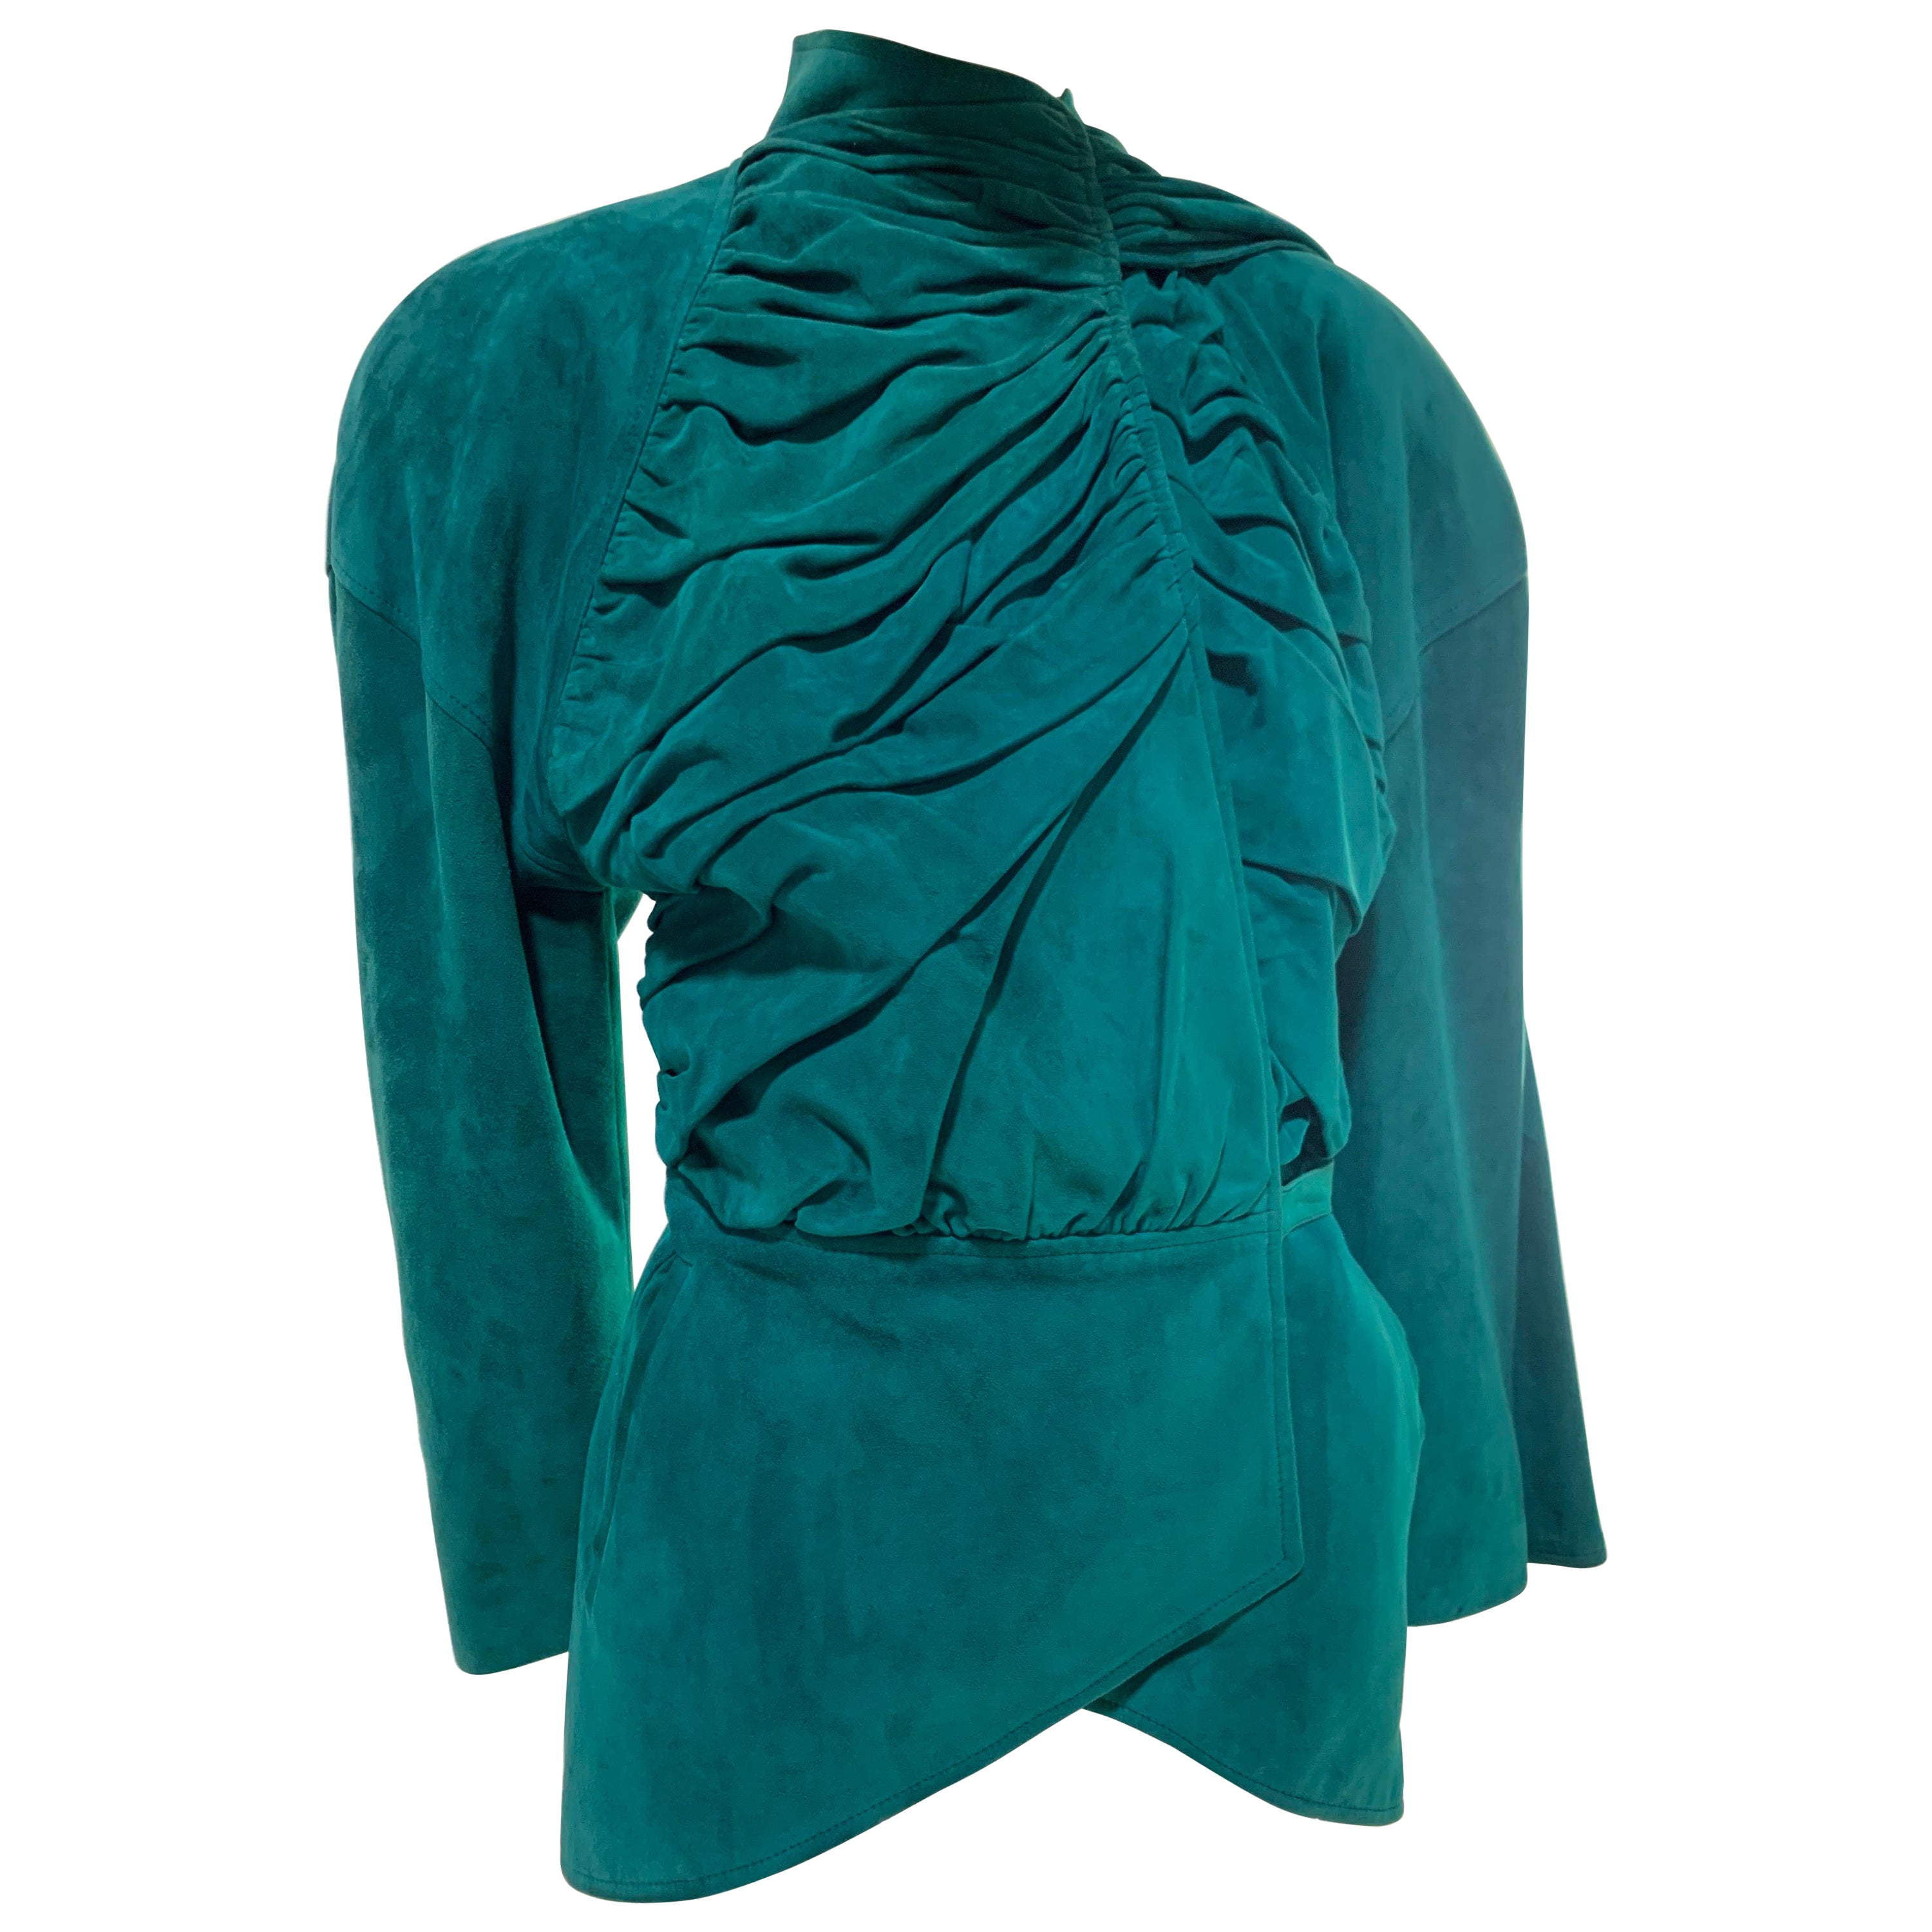 1980s Jean Claude Jitrois Emerald Suede Jacket w/ Gathered Front & Large Foulard For Sale